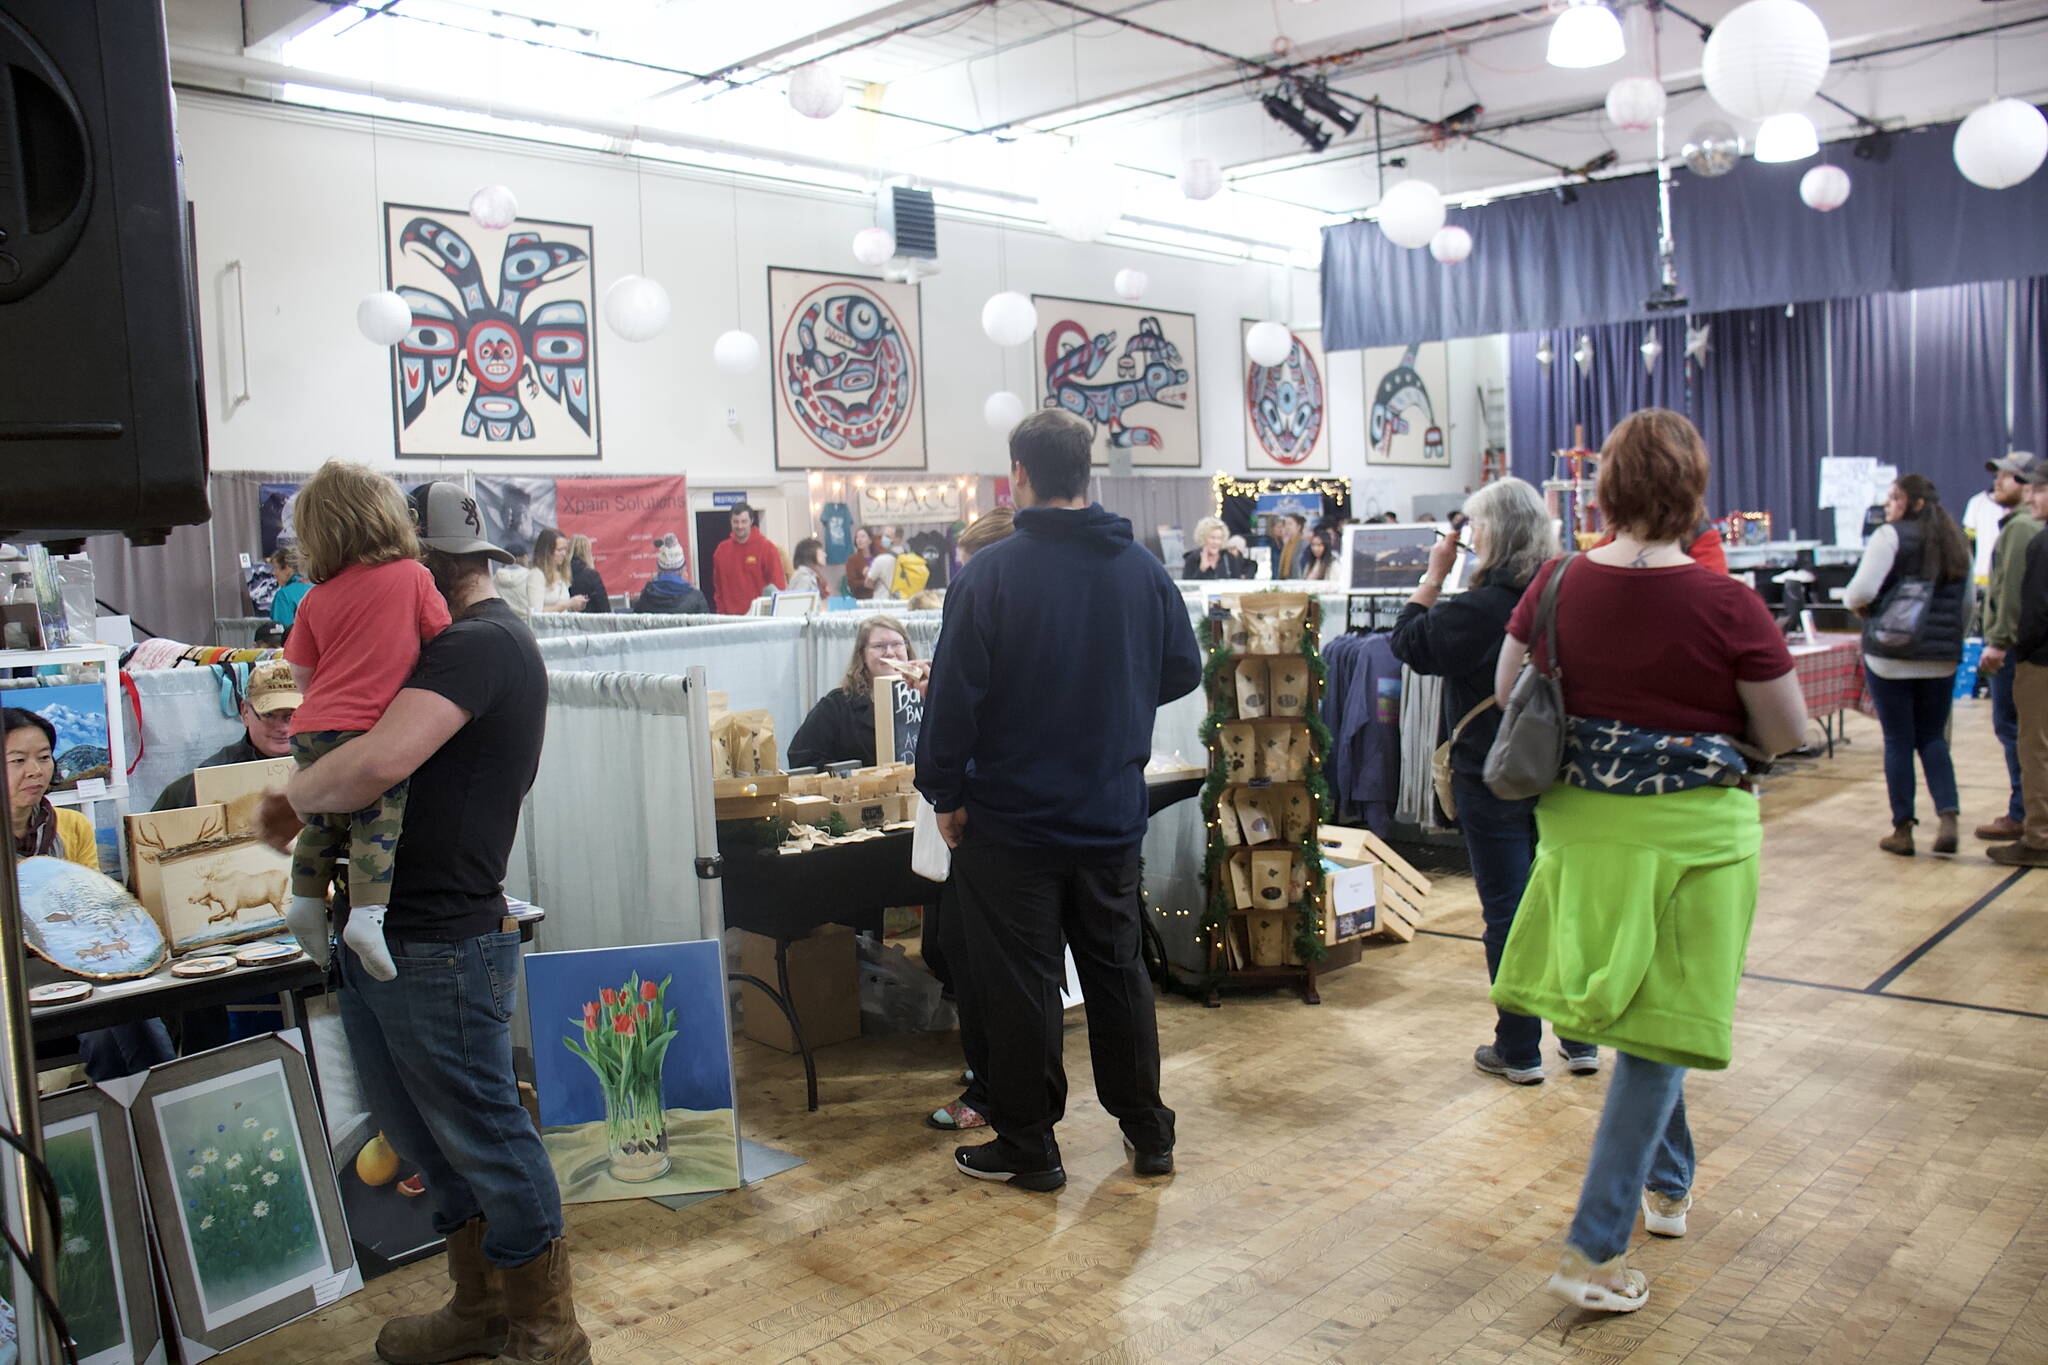 Shoppers browse the tables at the Juneau Arts Humanities Council building on Saturday, one of three buildings where public market events are happening during the three-day Thanksgiving holiday weekend. (Mark Sabbatini / Juneau Empire)